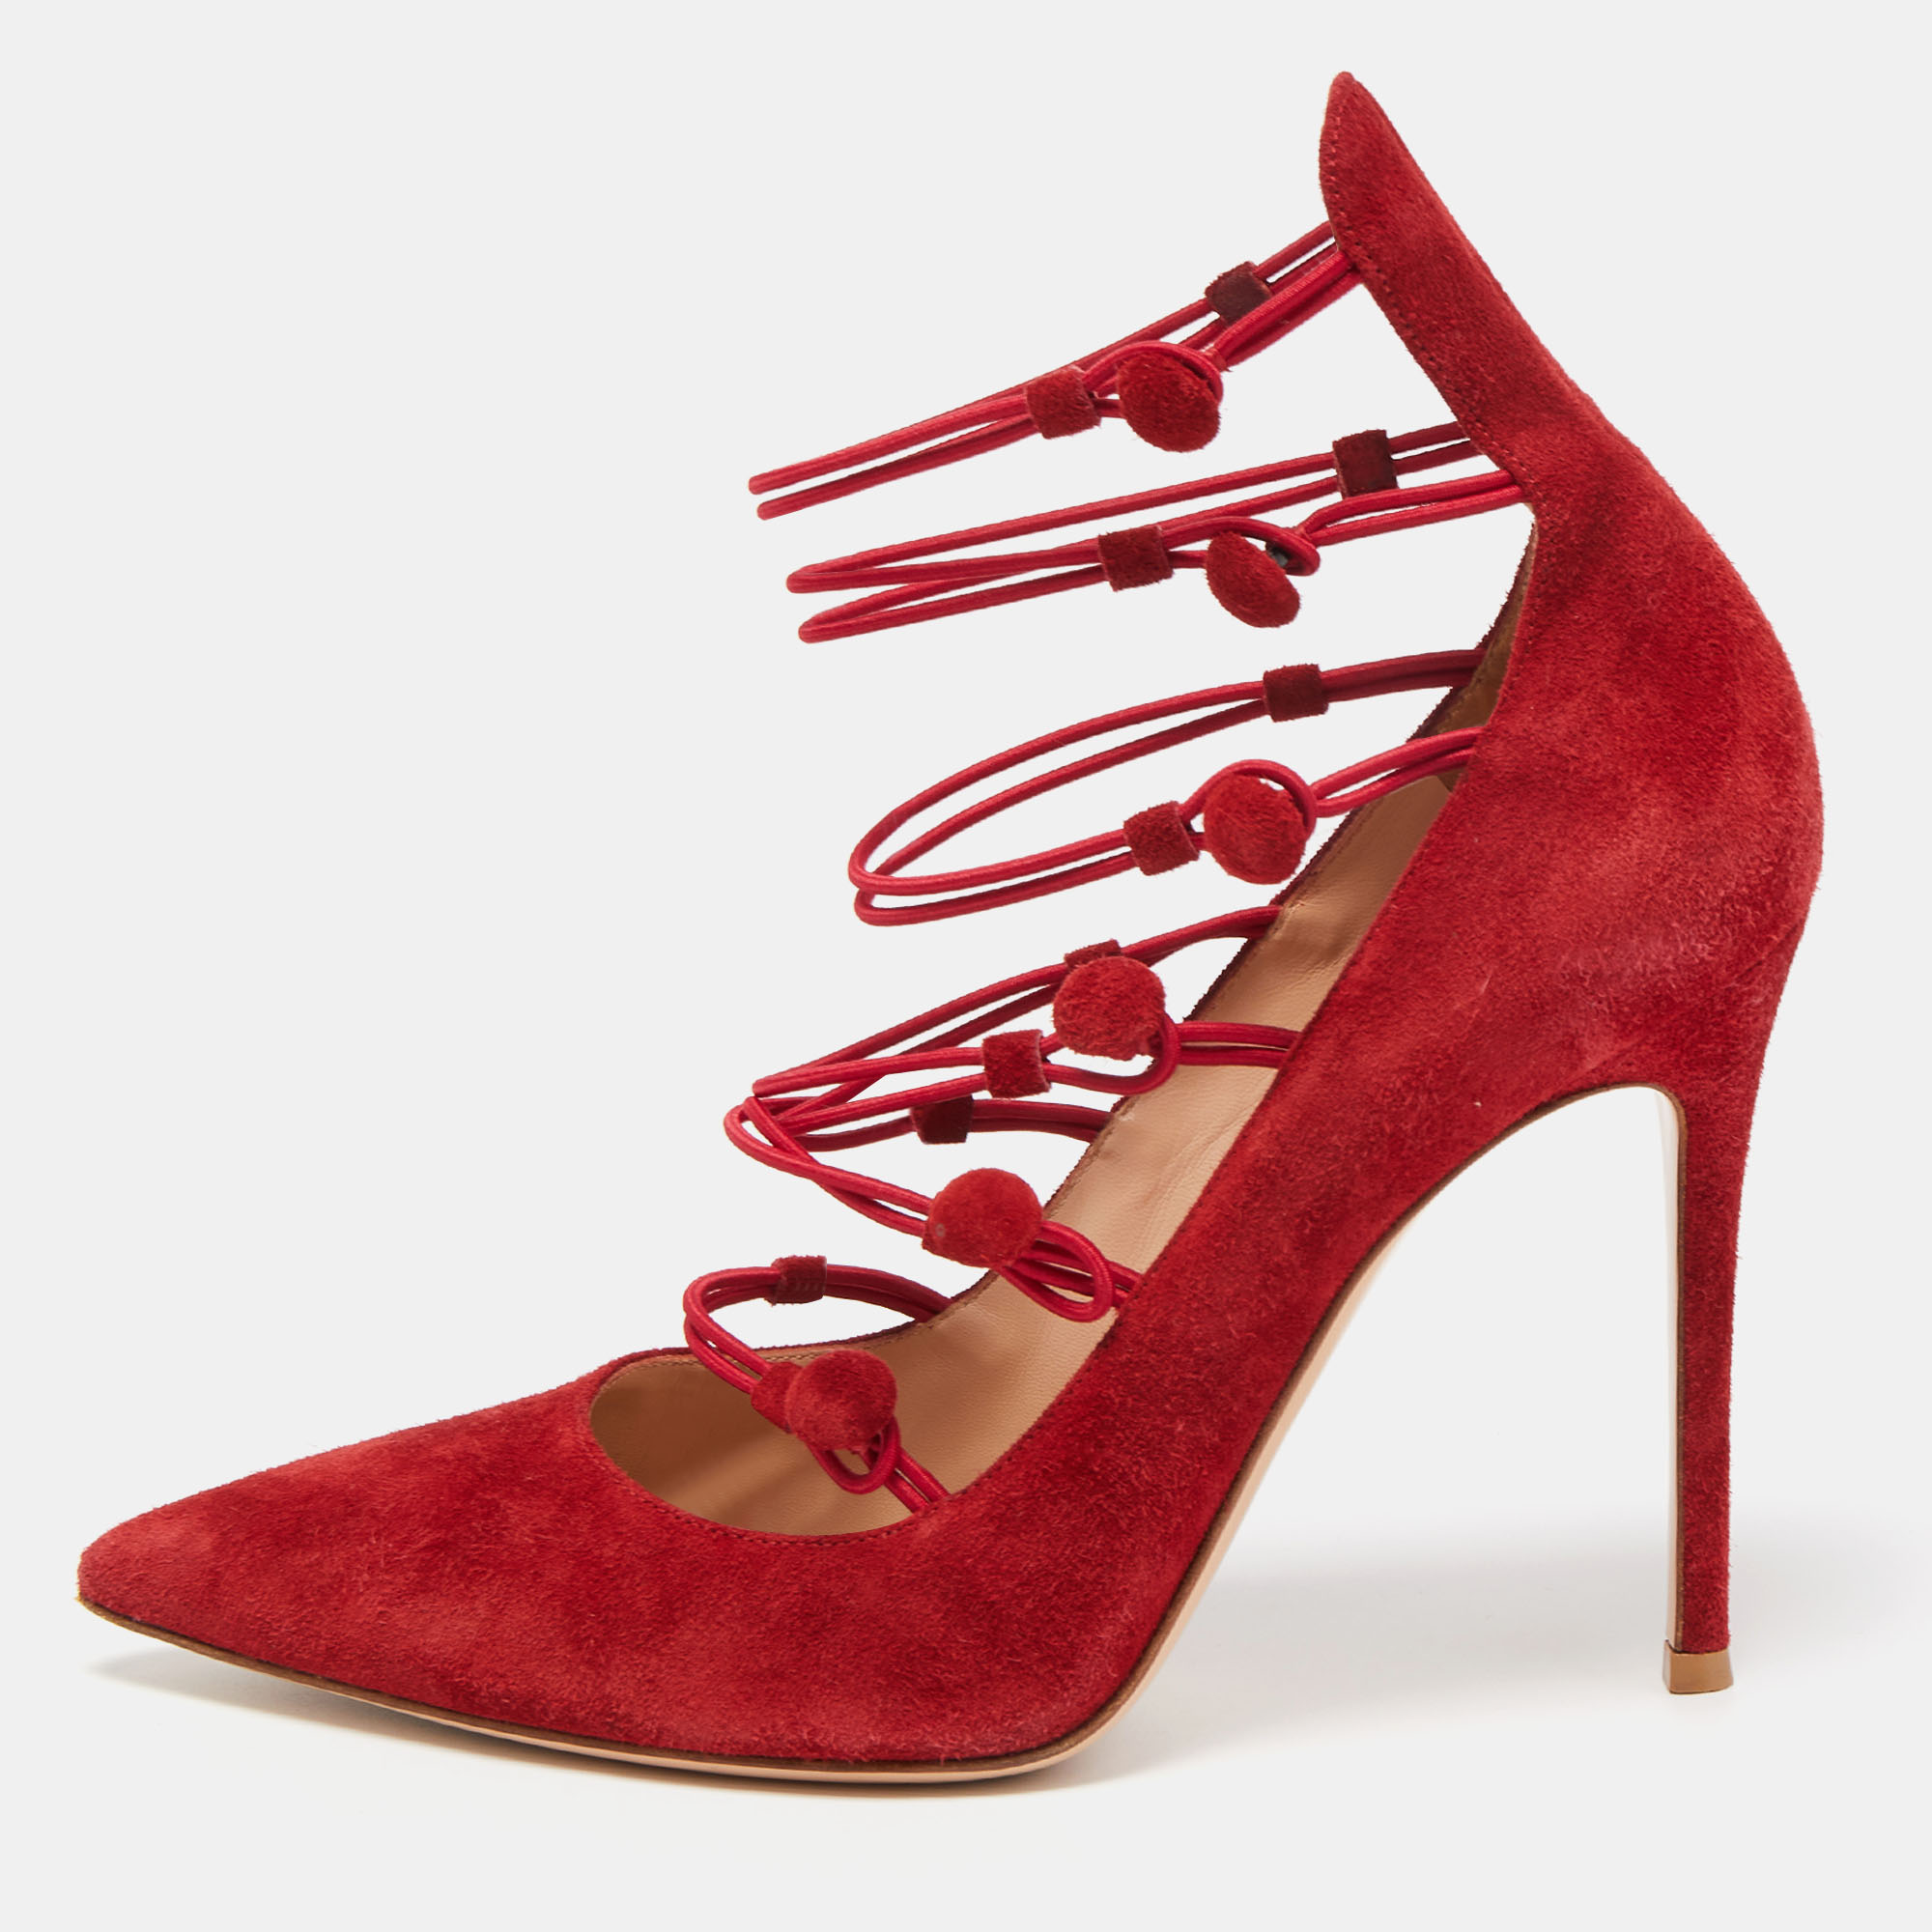 Gianvito Rossi Red Suede Marquis Strappy Pumps Size 39.5